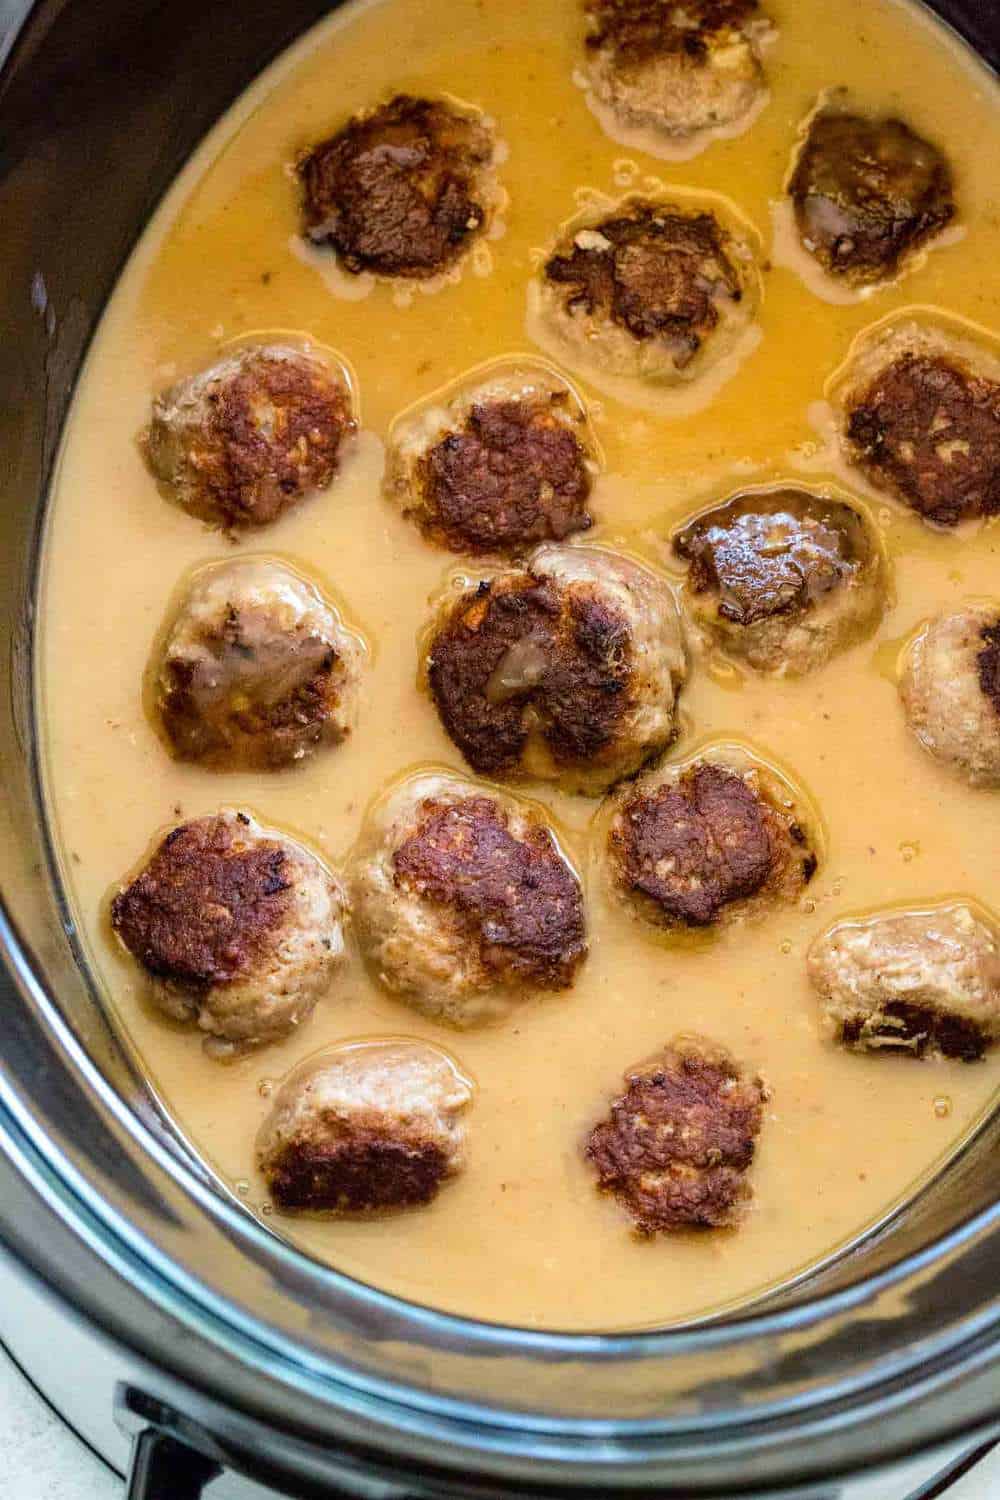 Swedish meatballs simmering in a slow cooker